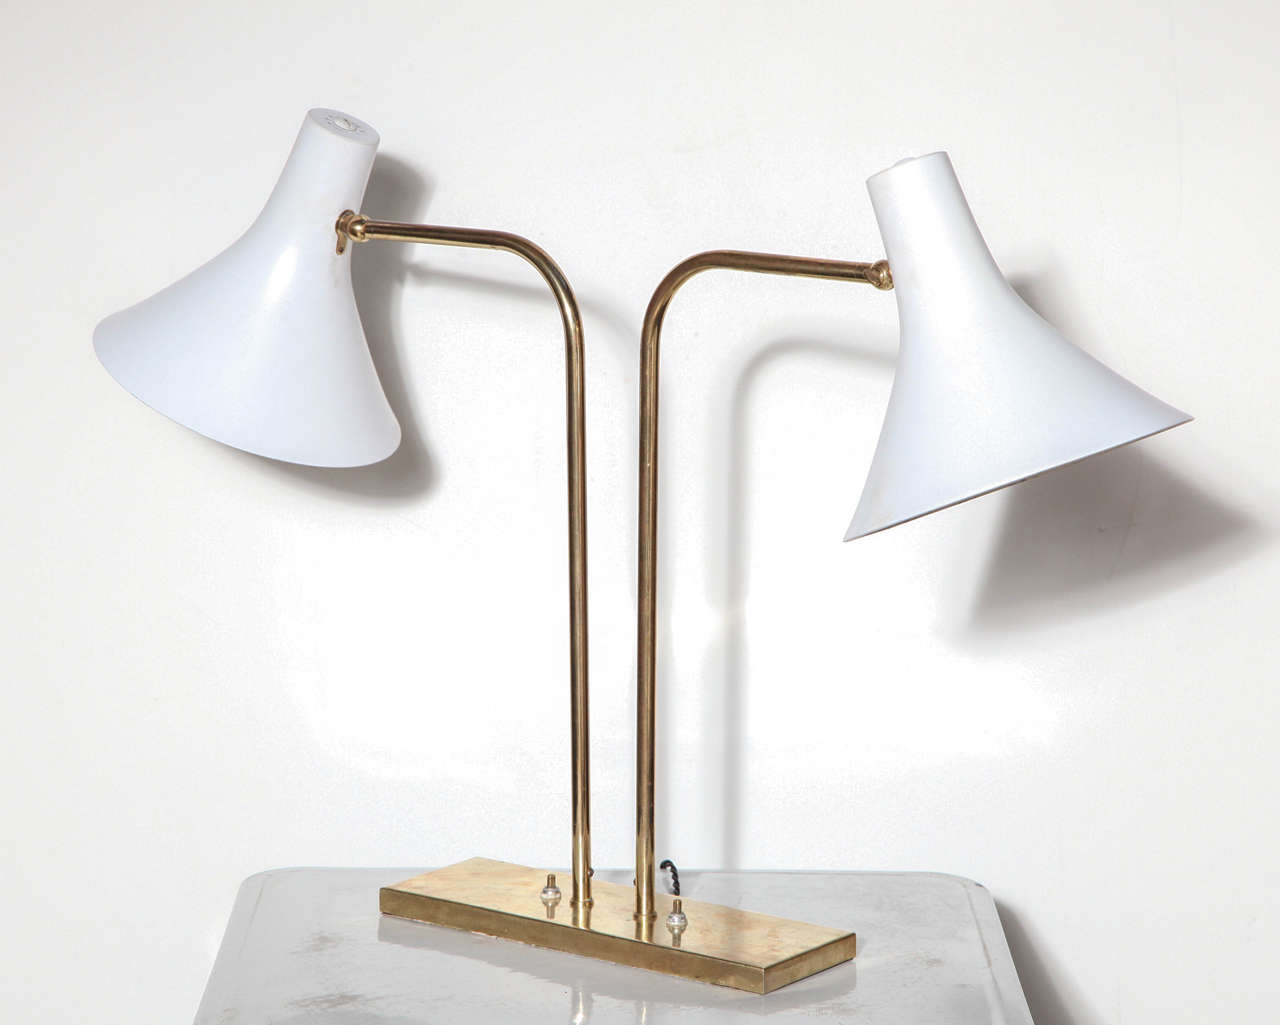 1950's Nessen Studios Brass and White Desk Lamp.  Featuring 2 White enameled adjustable Metal Shades, Brass arms and a rectangular Brass base.  Lamp design often attributed to Greta Von Nessen.  Two switches on Base.  Rewired